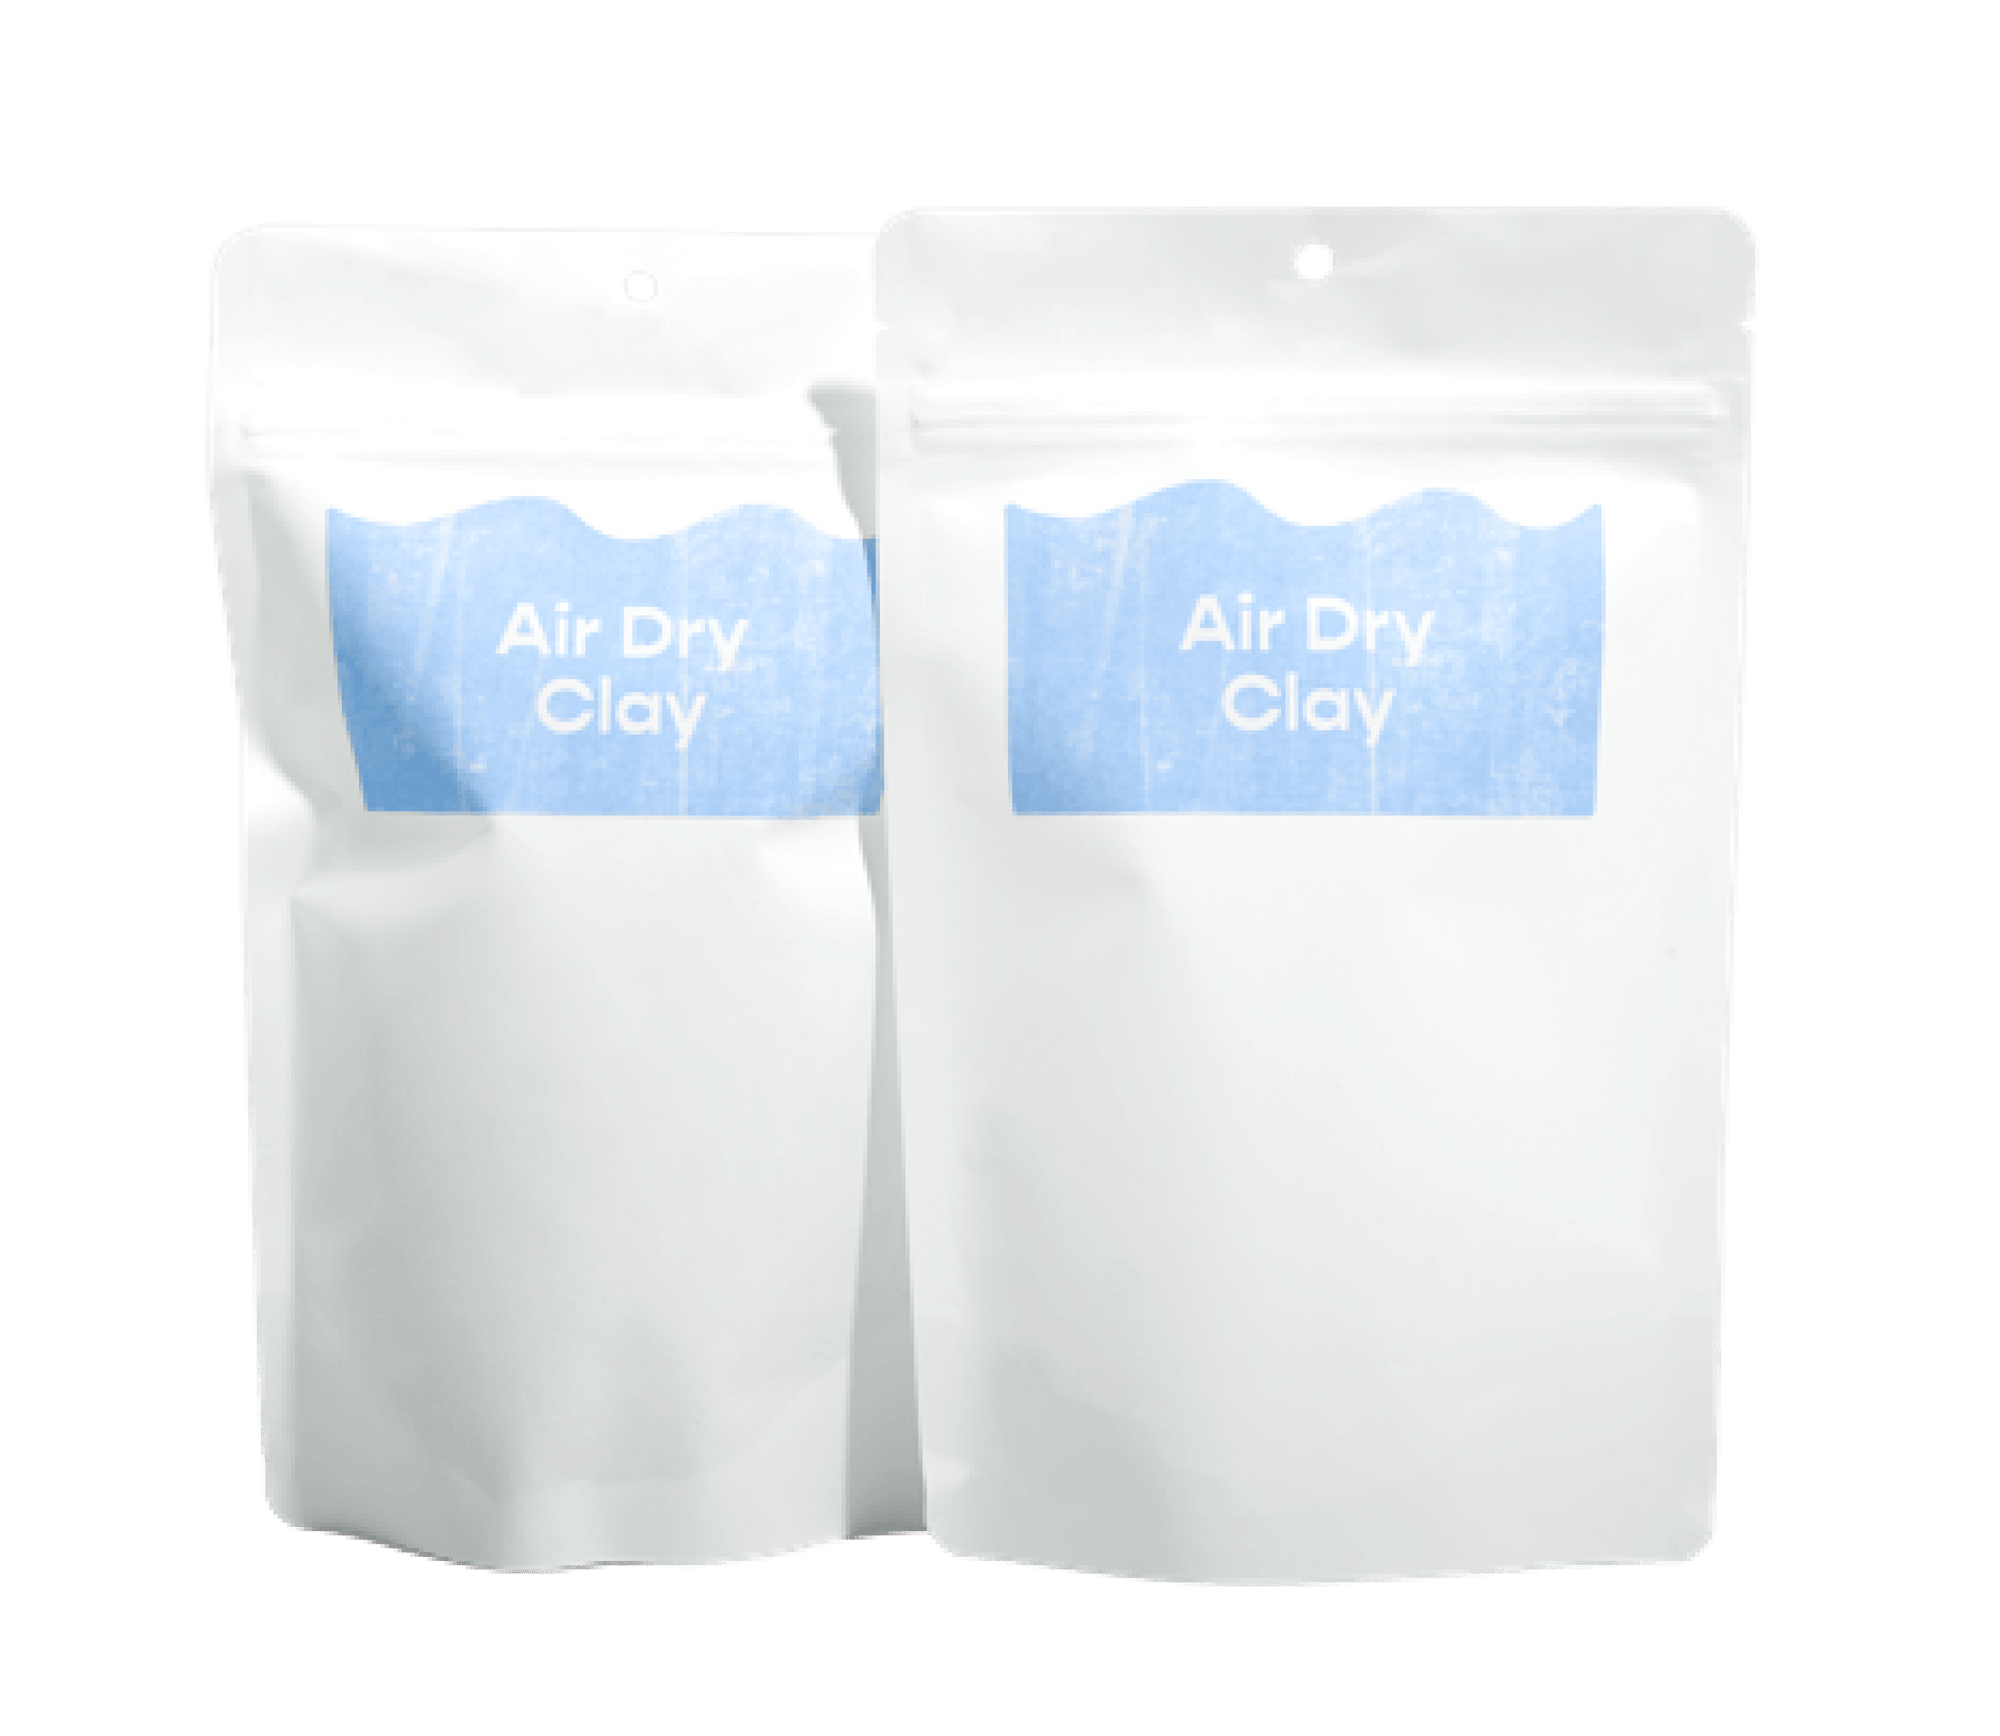 Our clays come in sealable air tight bags that are recyclable